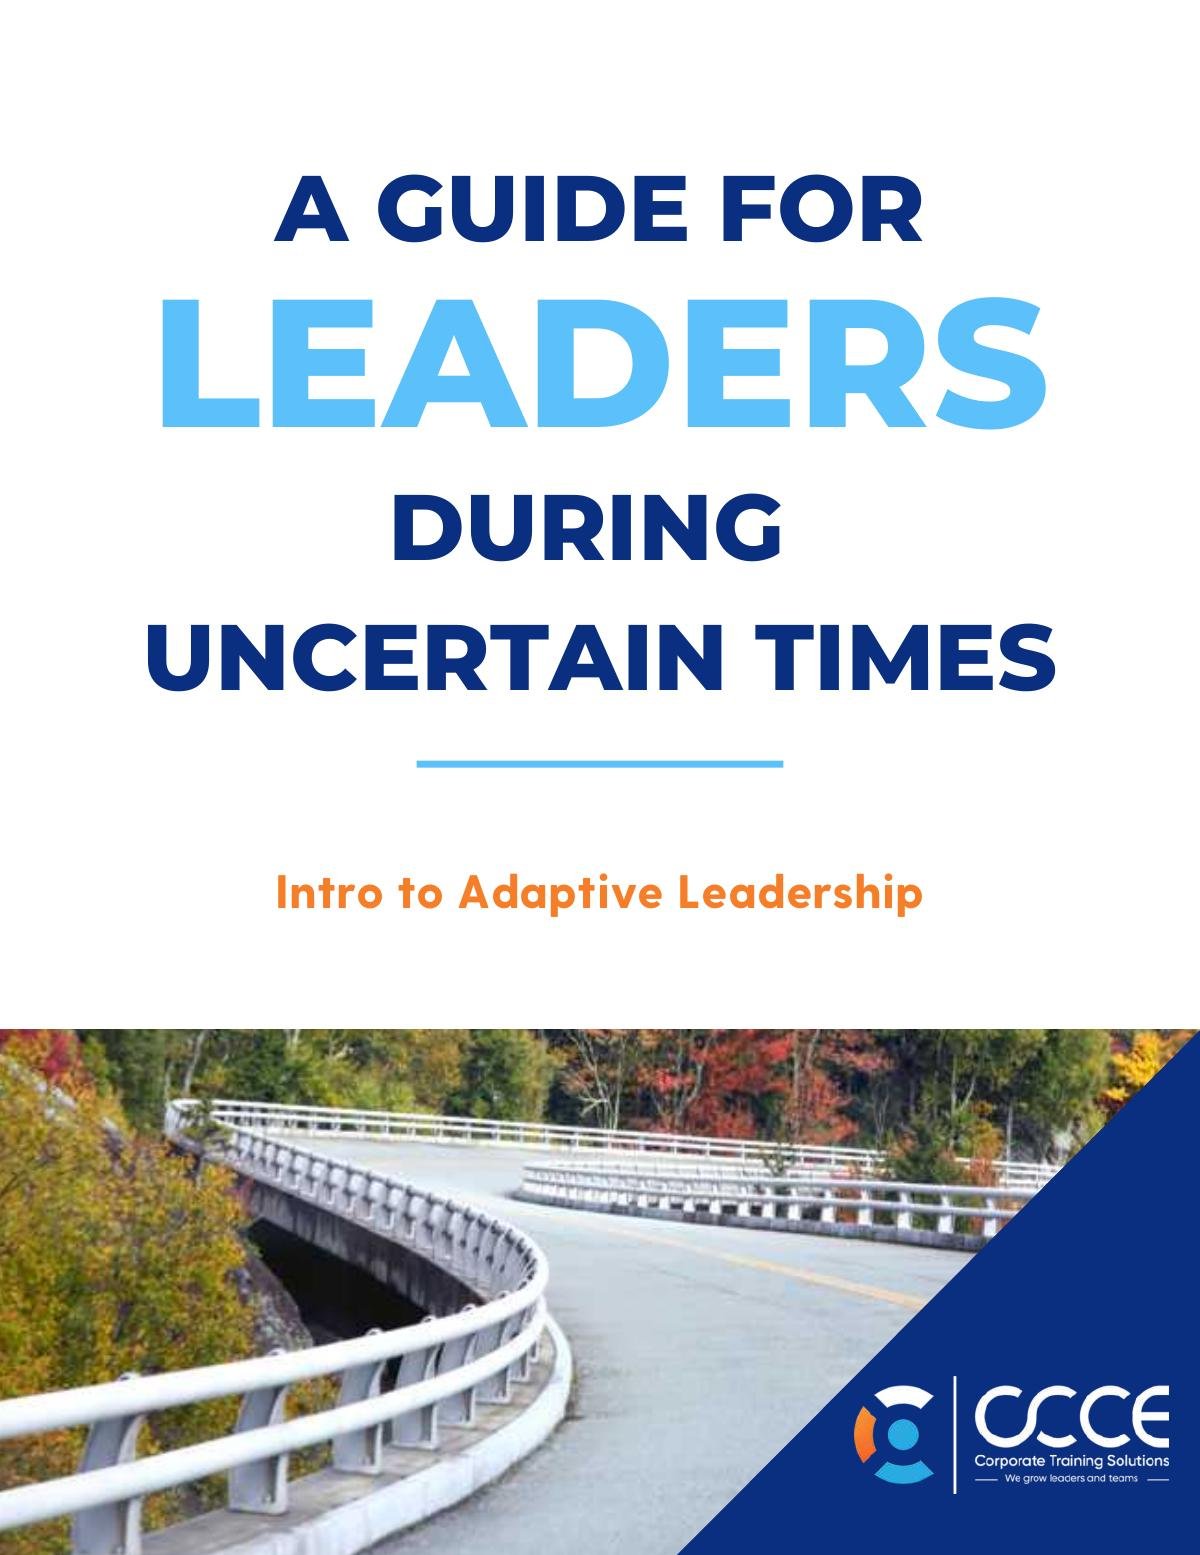 A Guide For Leaders During Uncertain Times